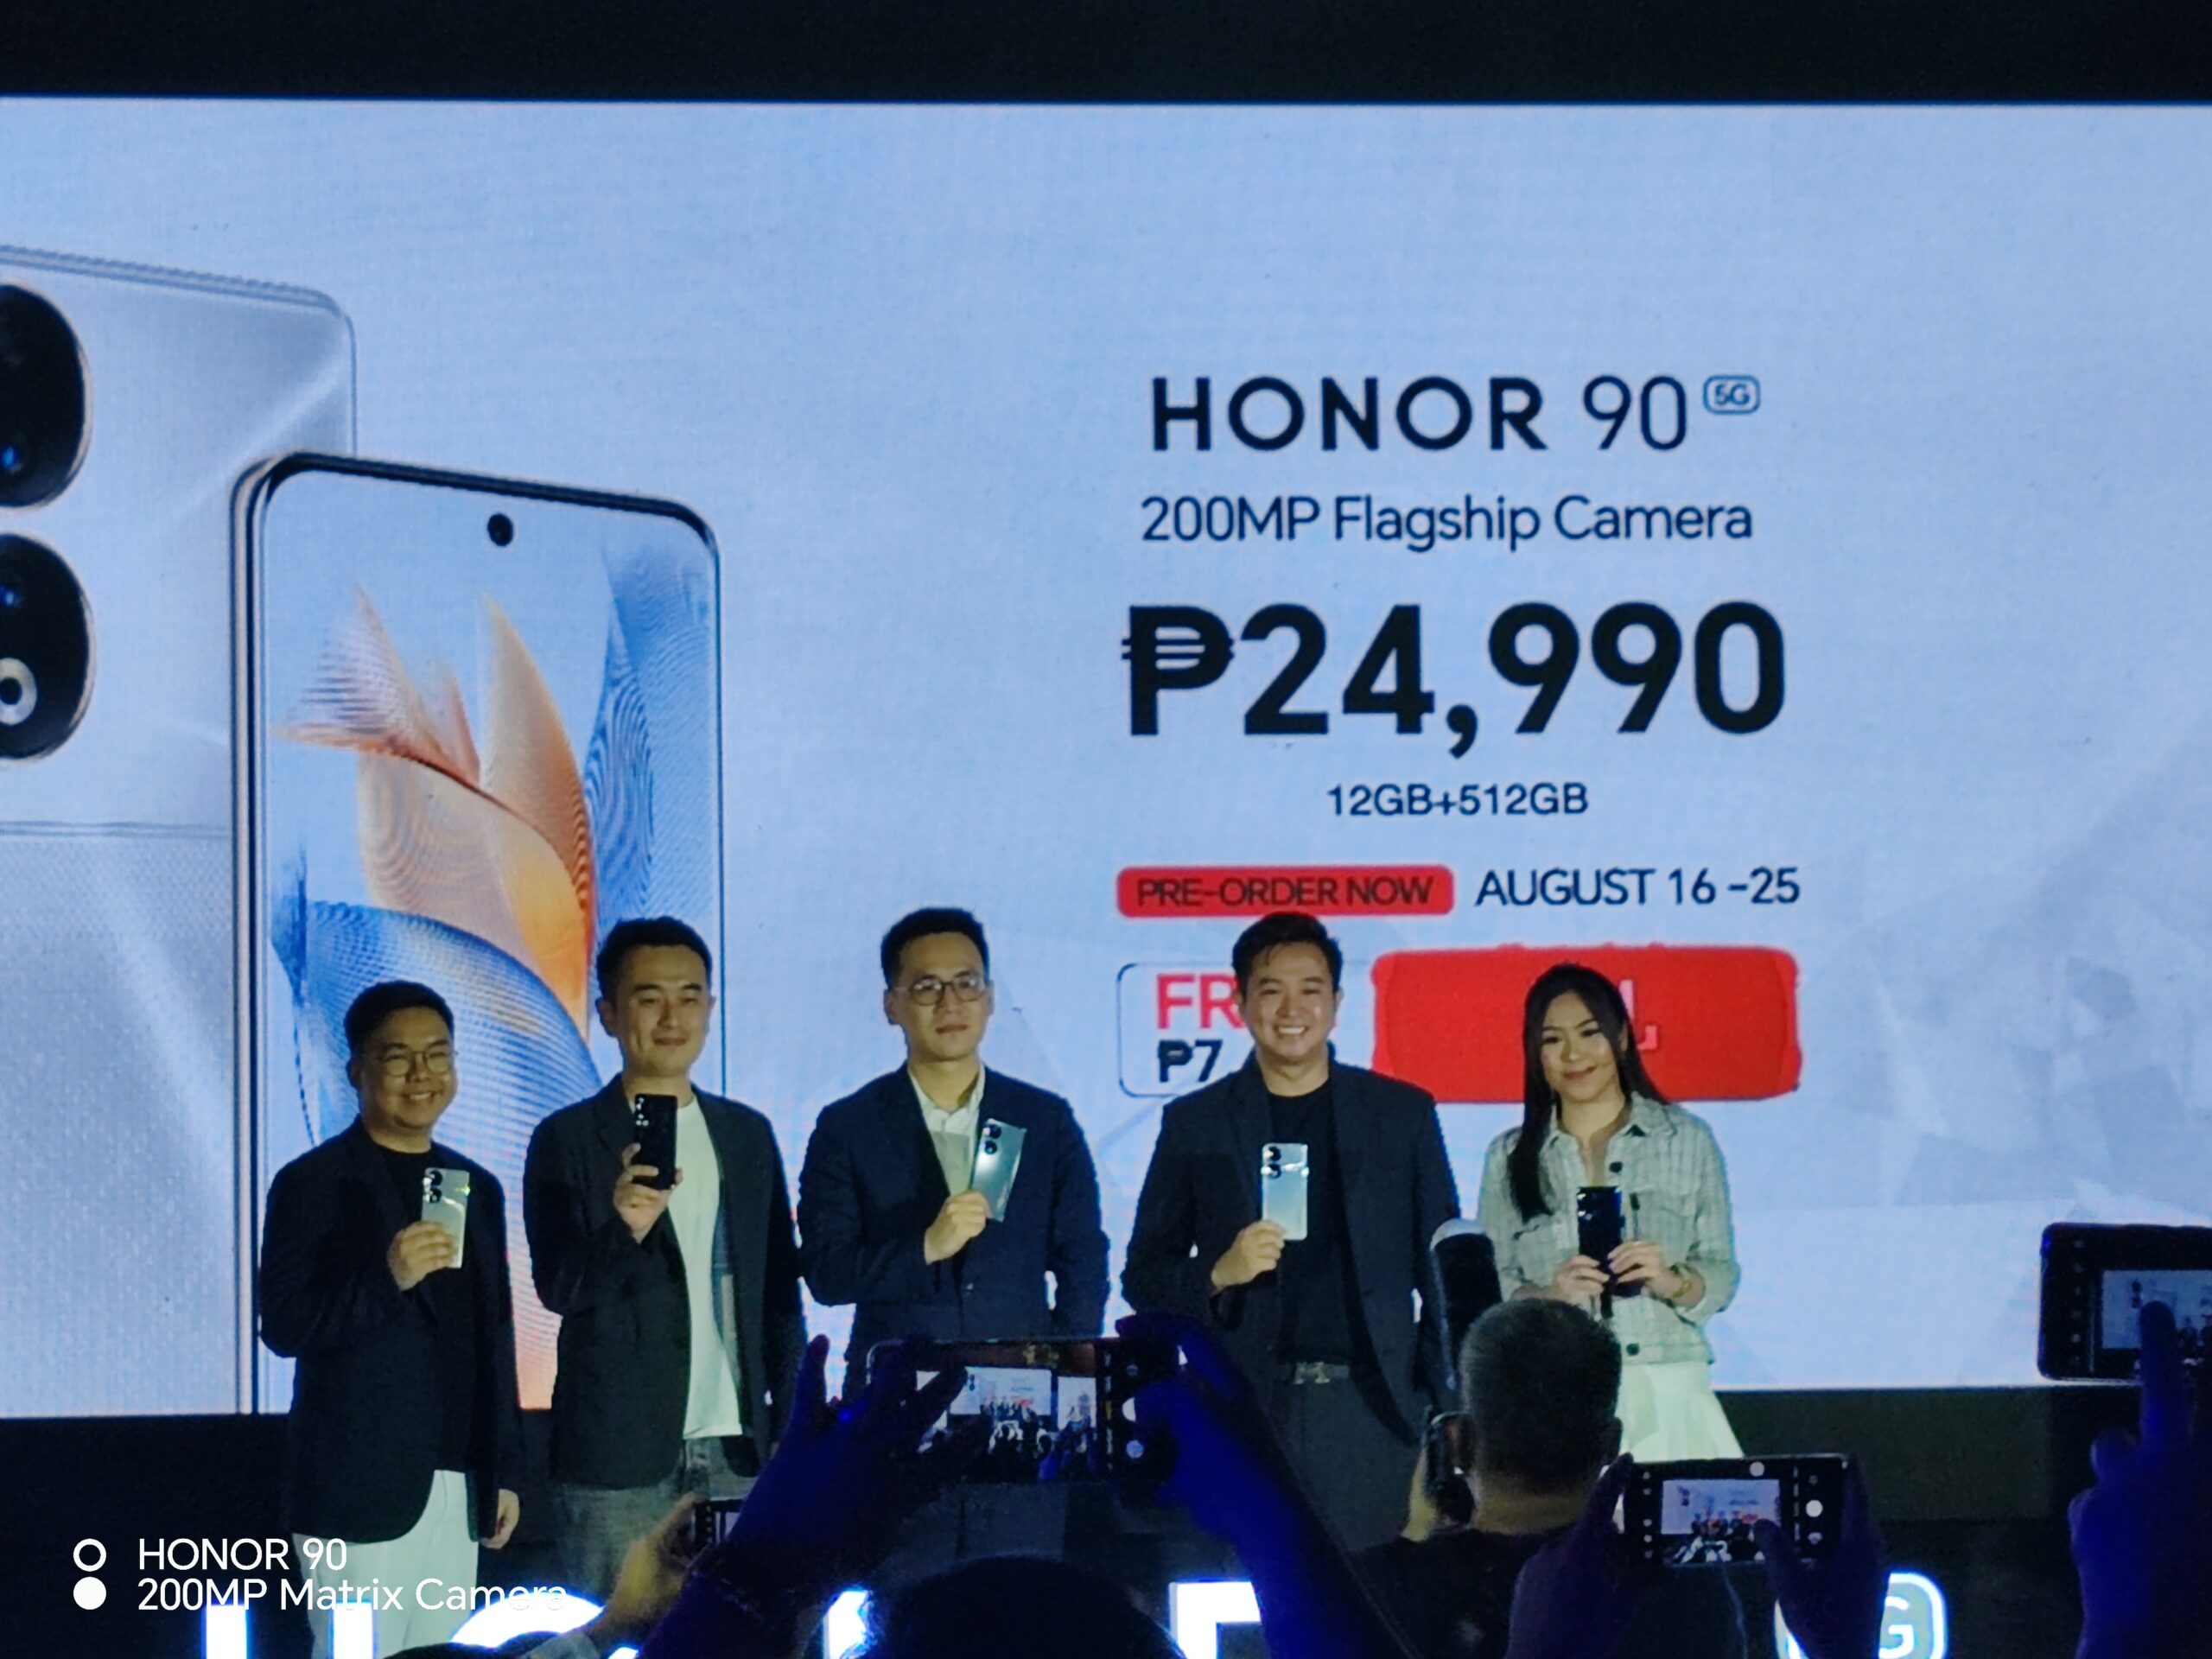 HONOR Launches 200 MP HONOR 90